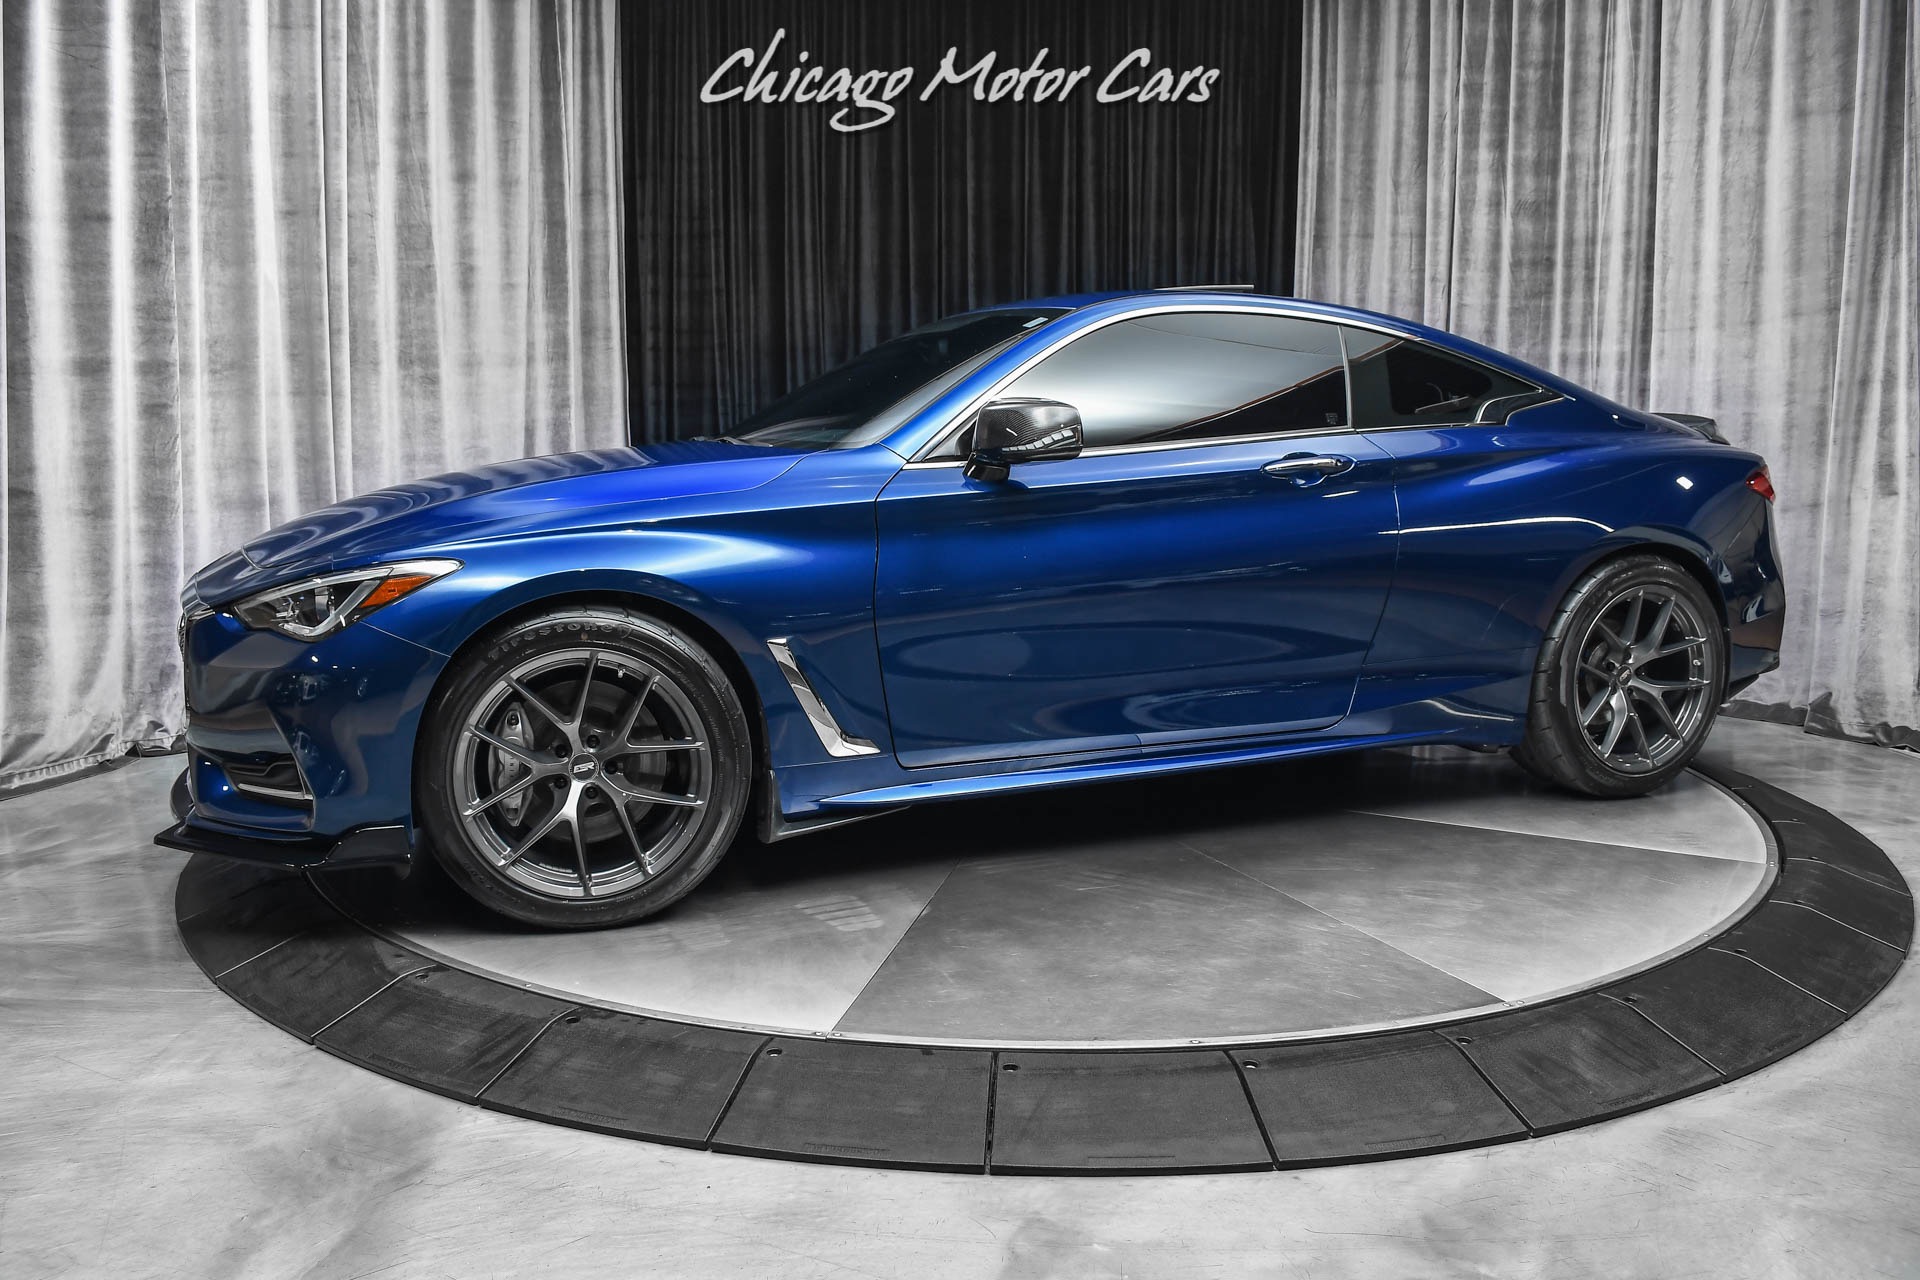 Used-2018-Infiniti-Q60-30T-Sport-Coupe-AMS-PERFOMANCE-500WHP-AWD-54K-MSRP-LOADED